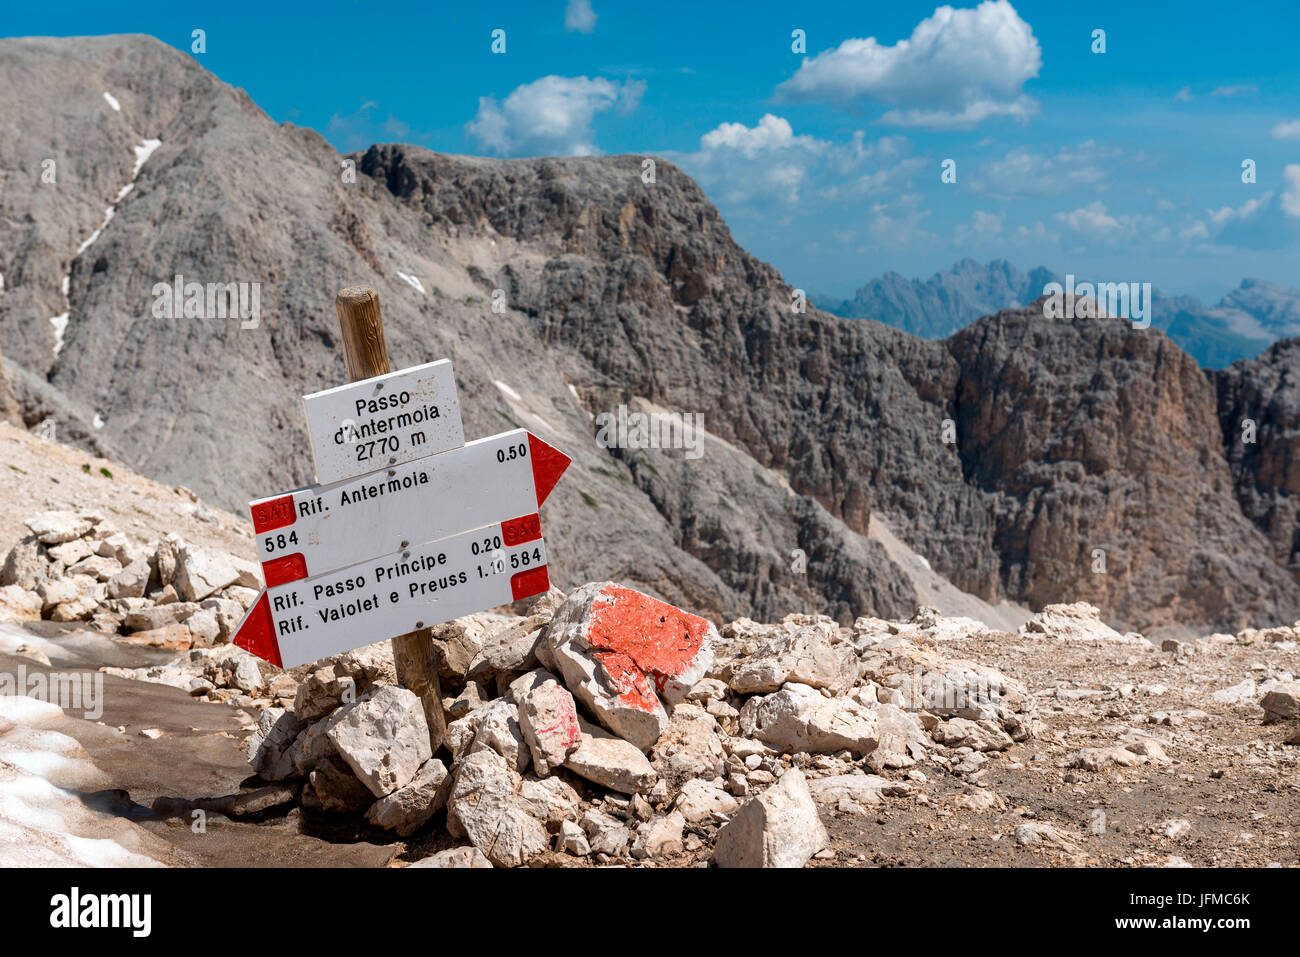 Italy, Trentino Alto Adige, Signposting CAI / SAT along the trial n, 584 from the Antermoia Pass, Dolomites Stock Photo